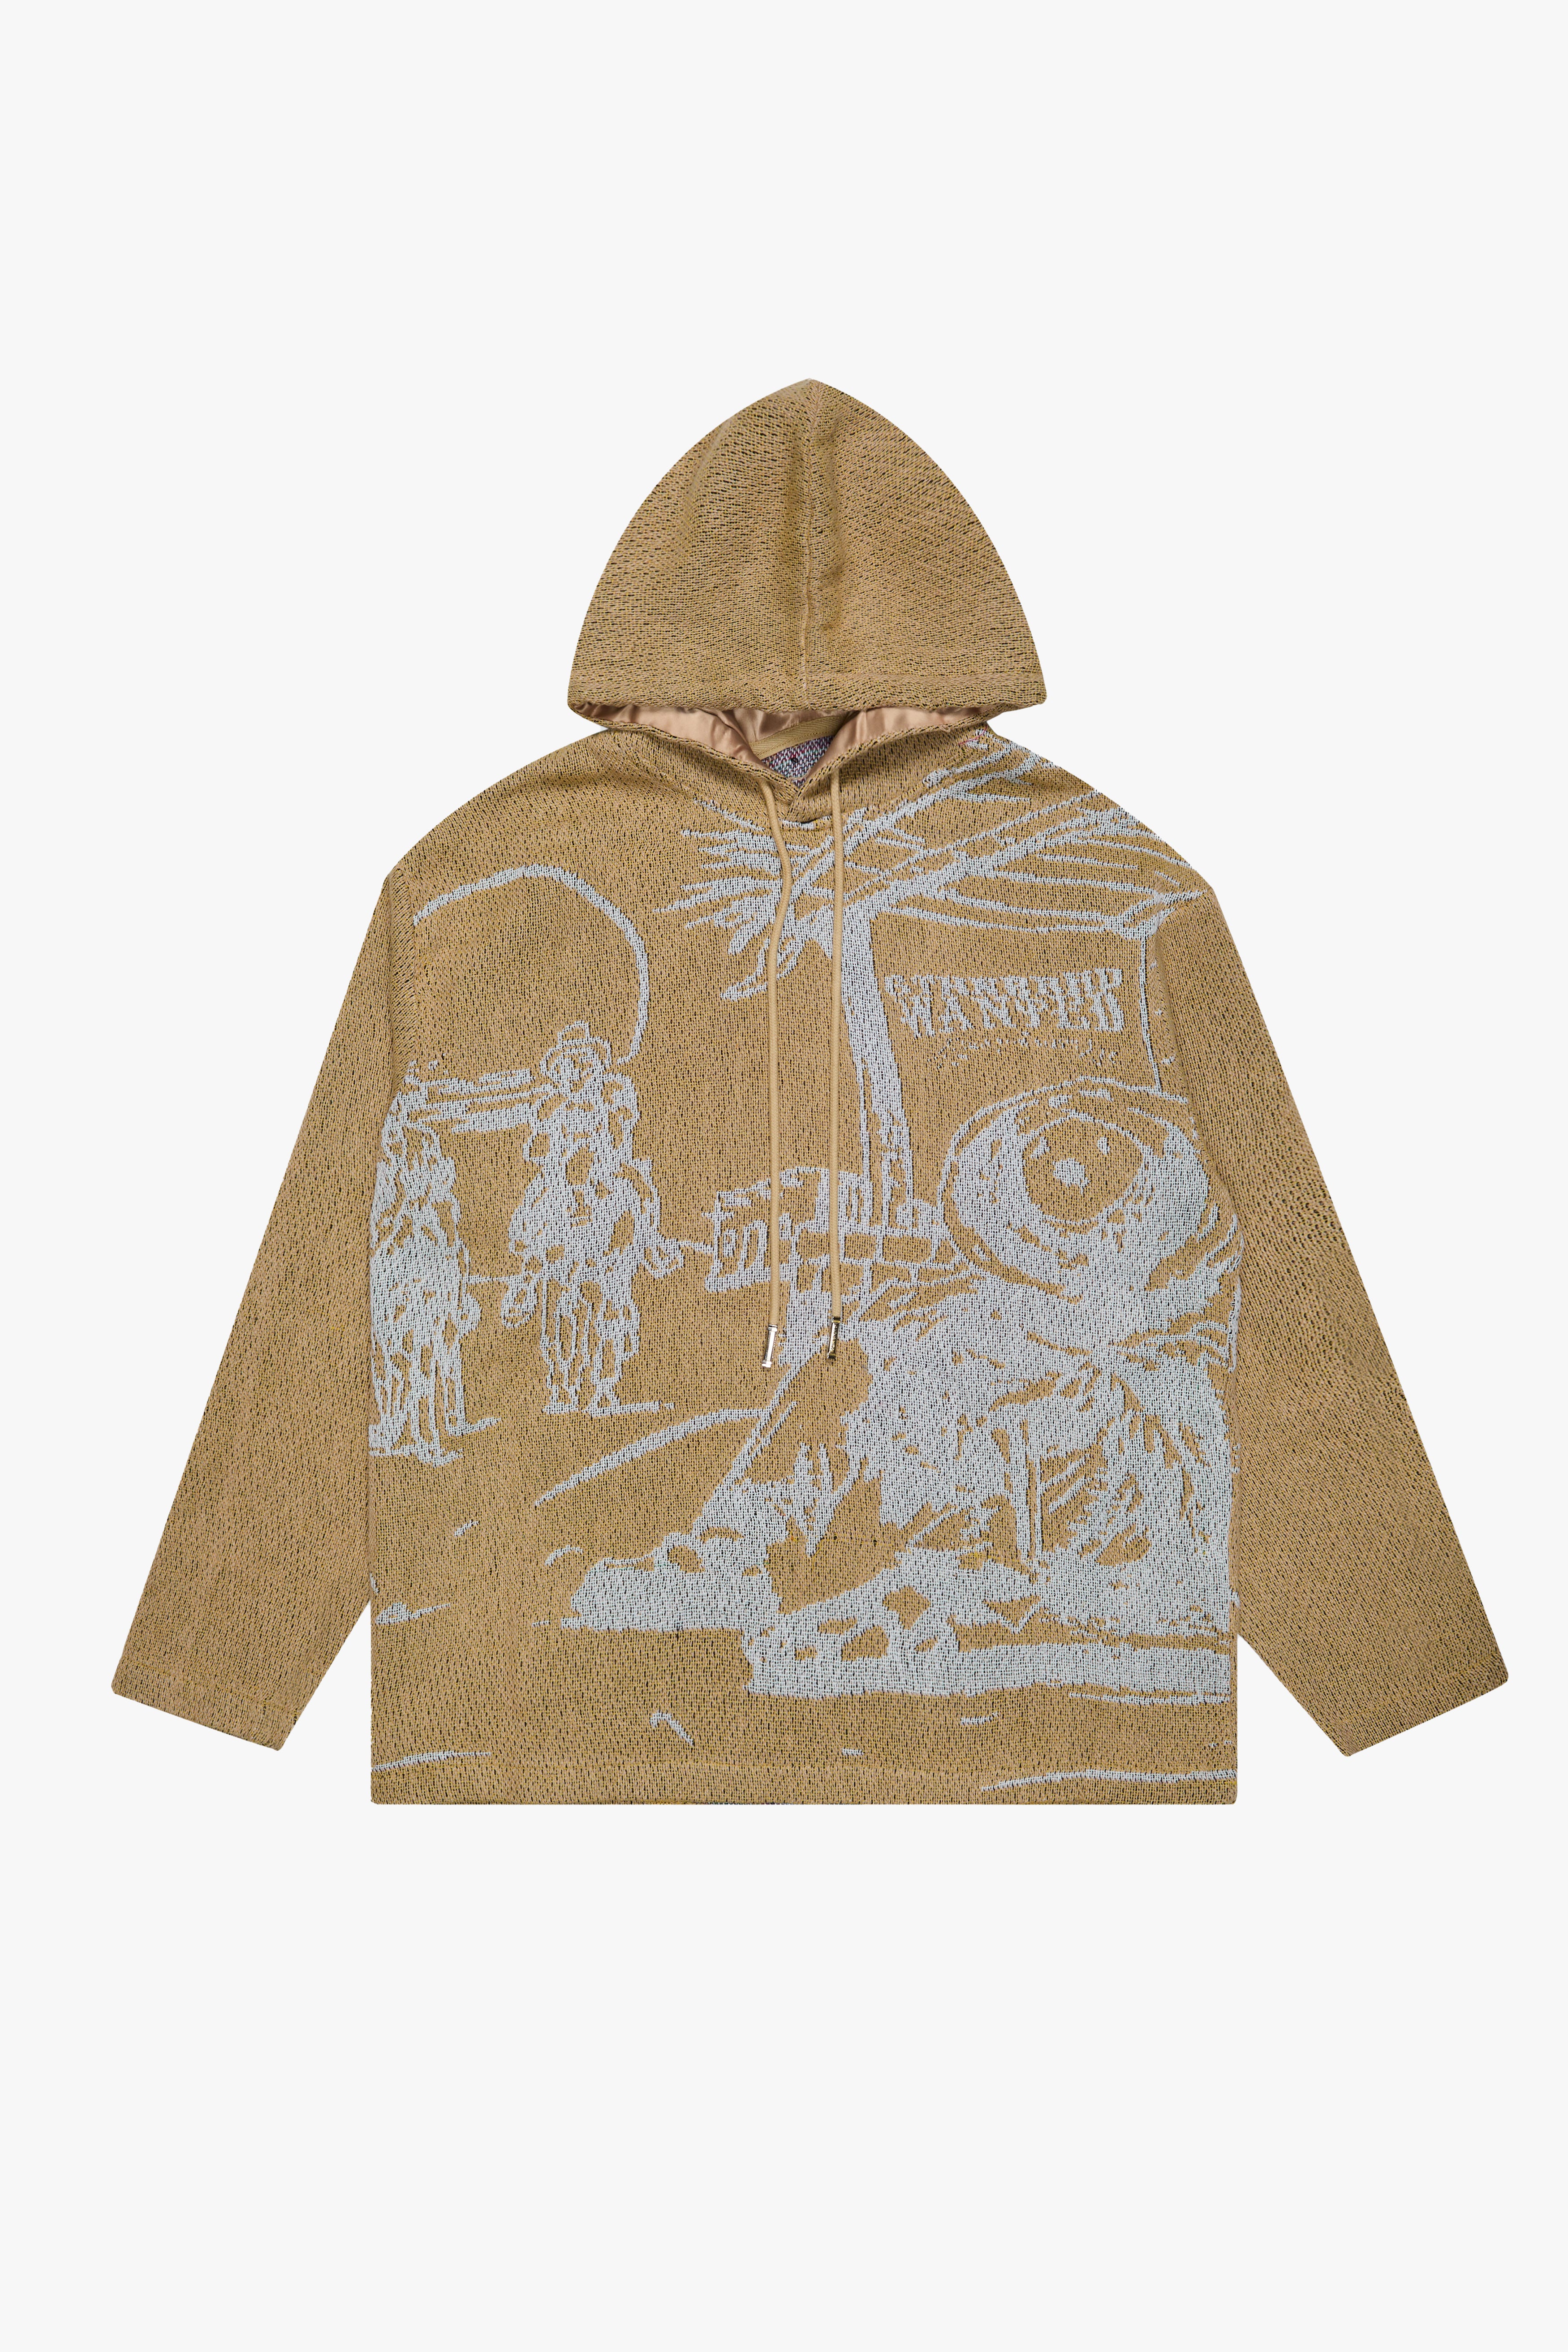 6thNBRHD TAPESTRY PULLOVER "TOWN" WHEAT